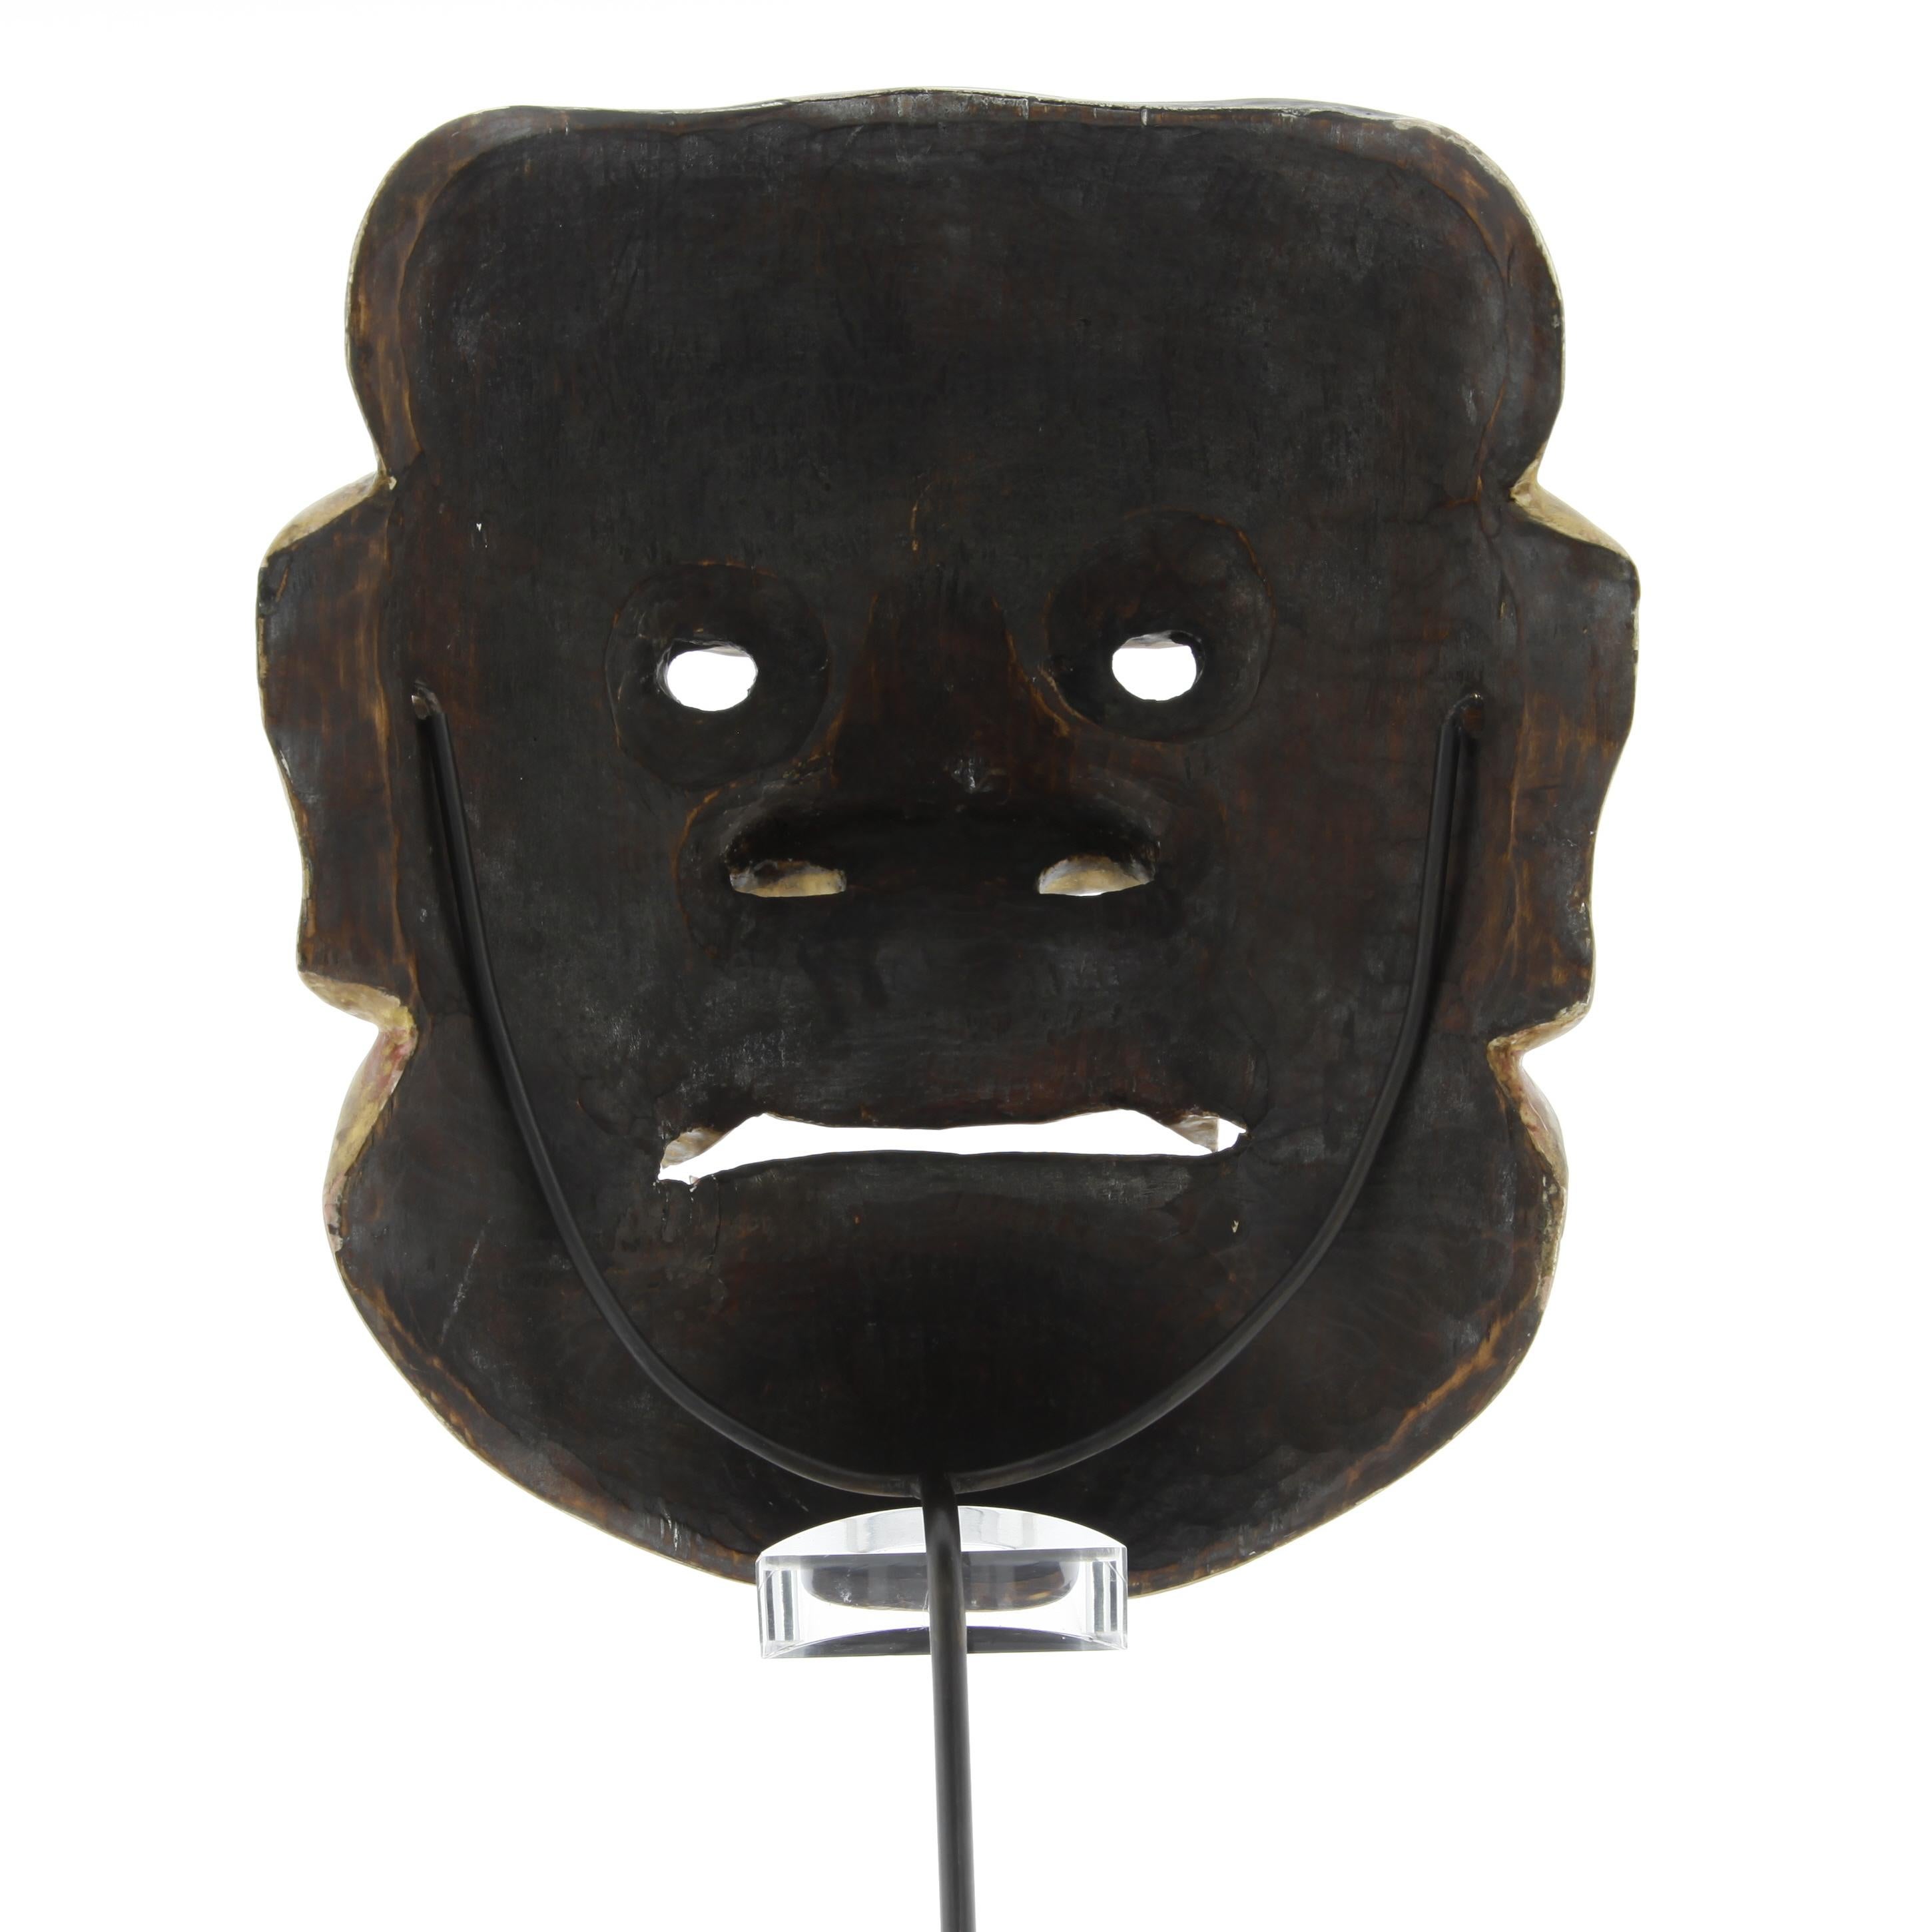 Noh Mask of a Fierce God, Actor, Japanese Theatre, Drama, 19th Century Woodcraft - Other Art Style Sculpture by Unknown